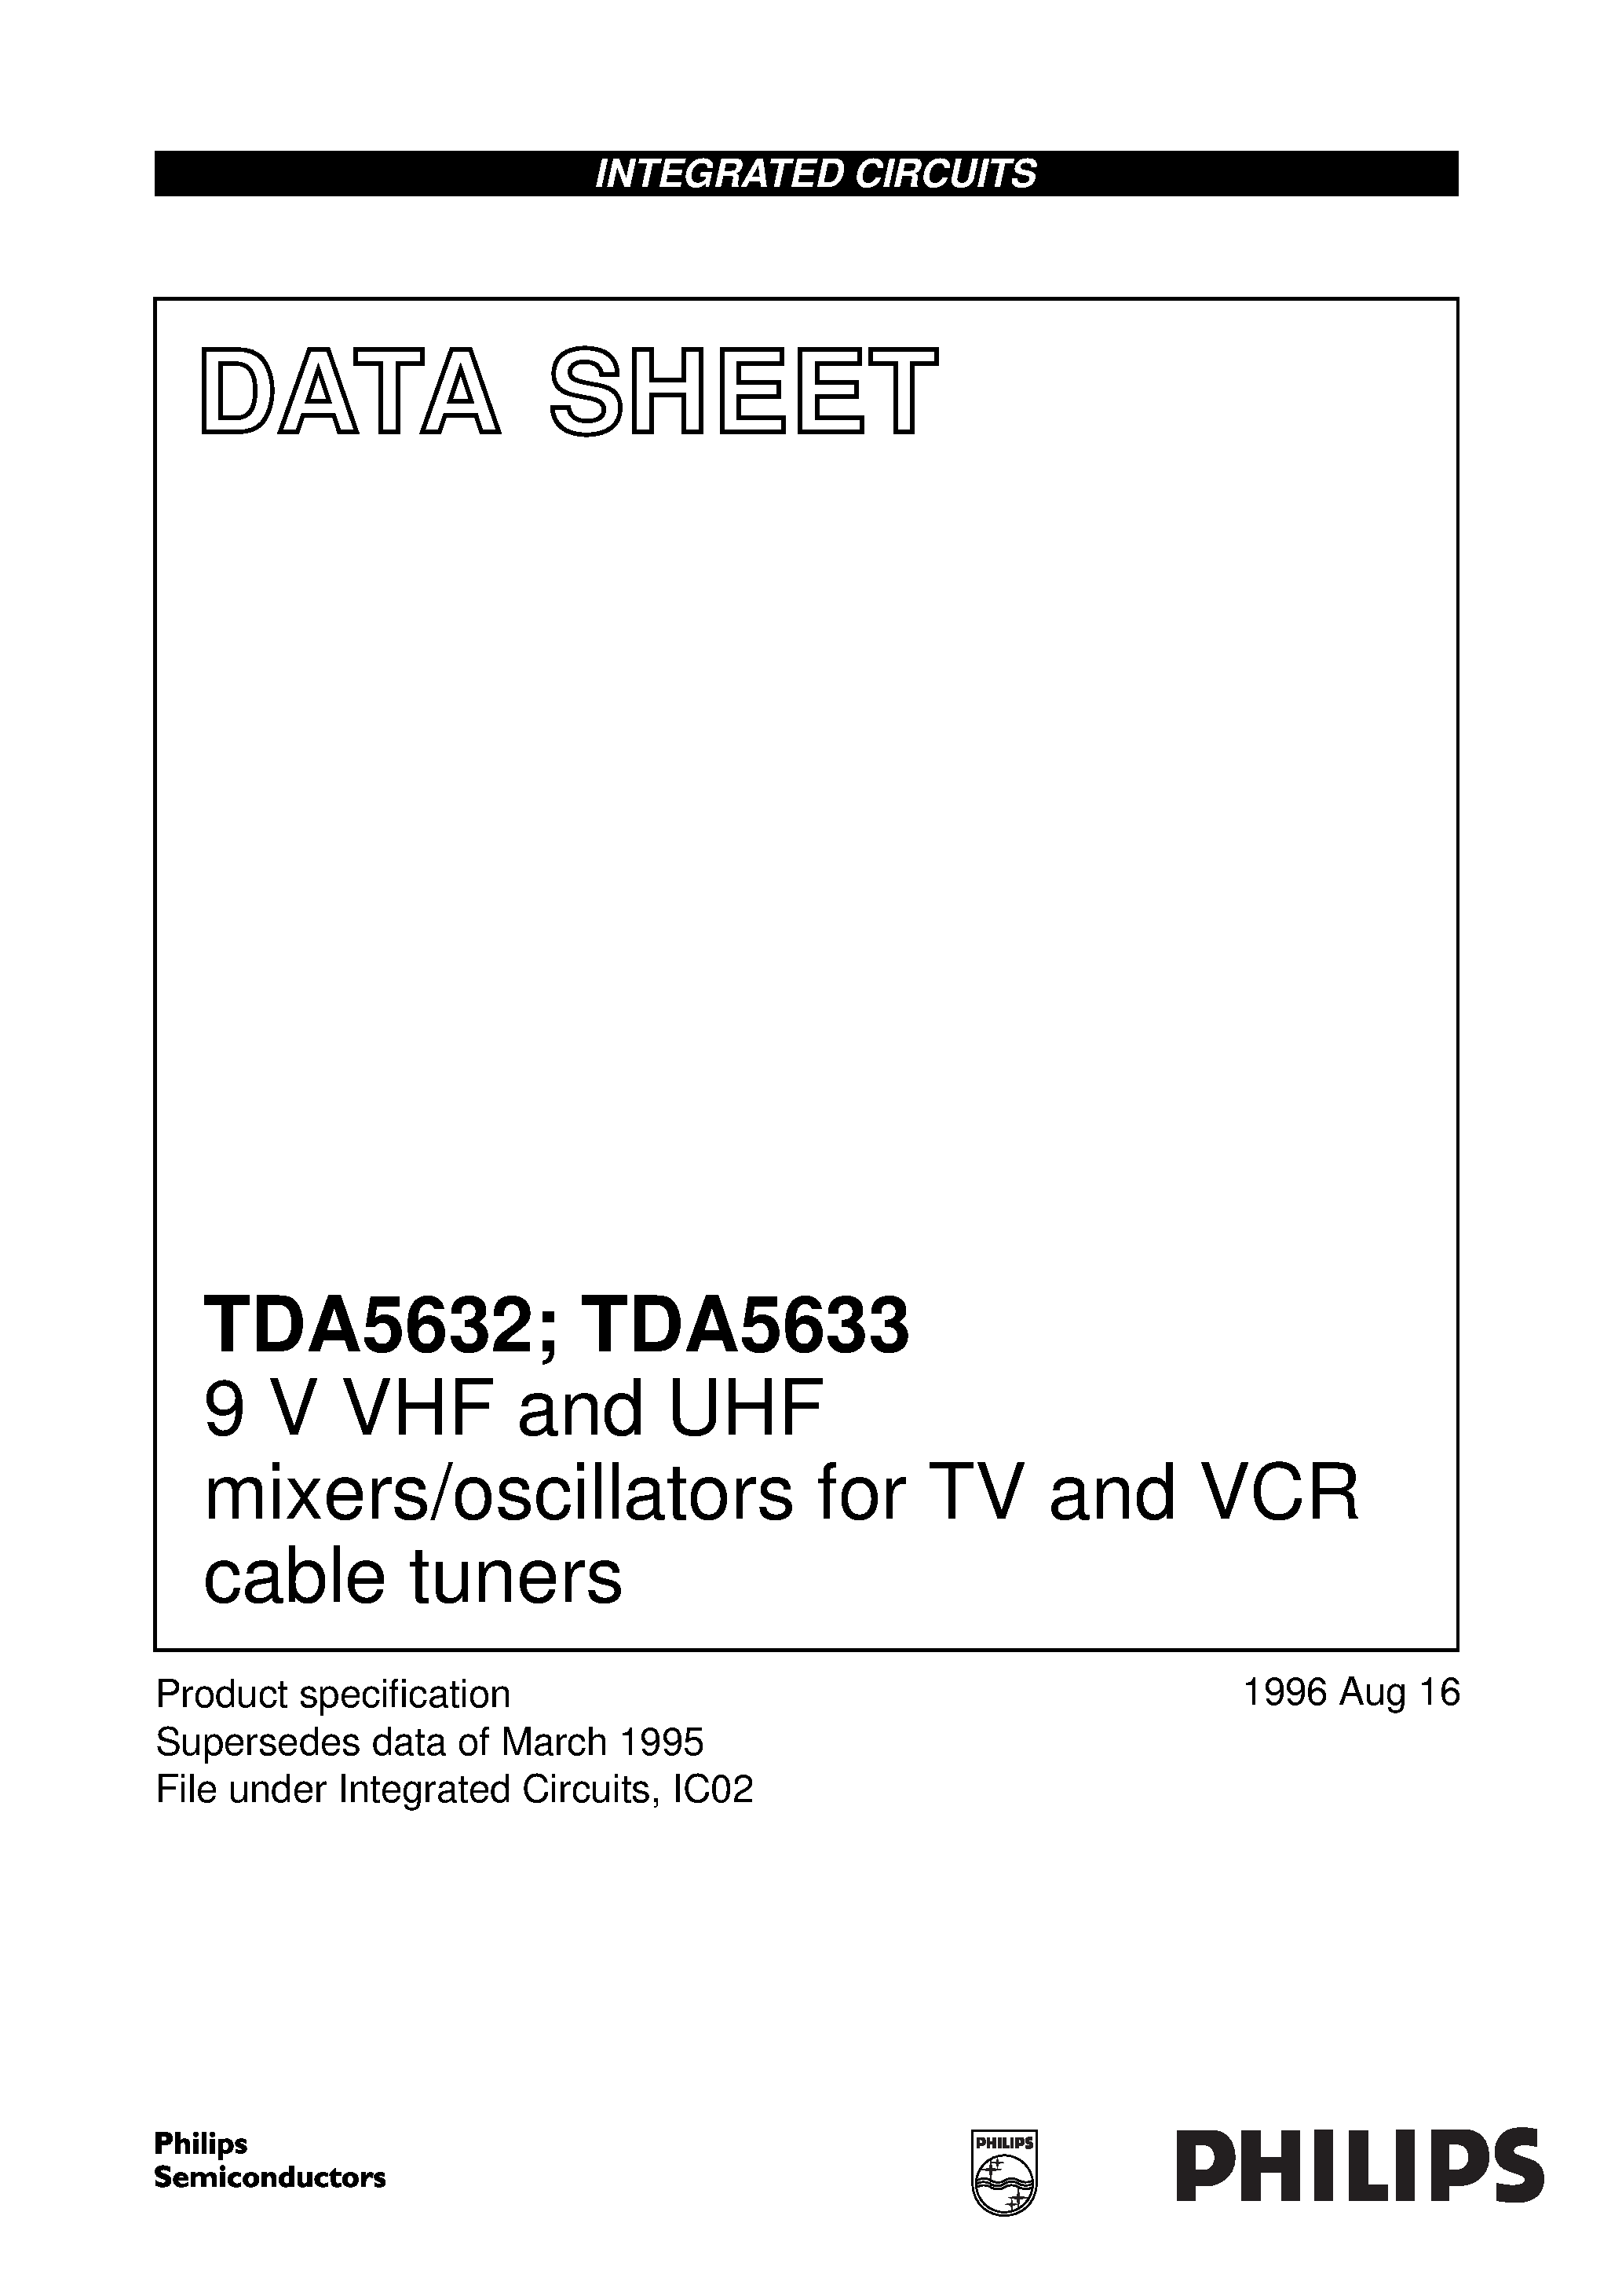 Даташит TDA5632 - 9 V VHF and UHF mixers/oscillators for TV and VCR cable tuners страница 1